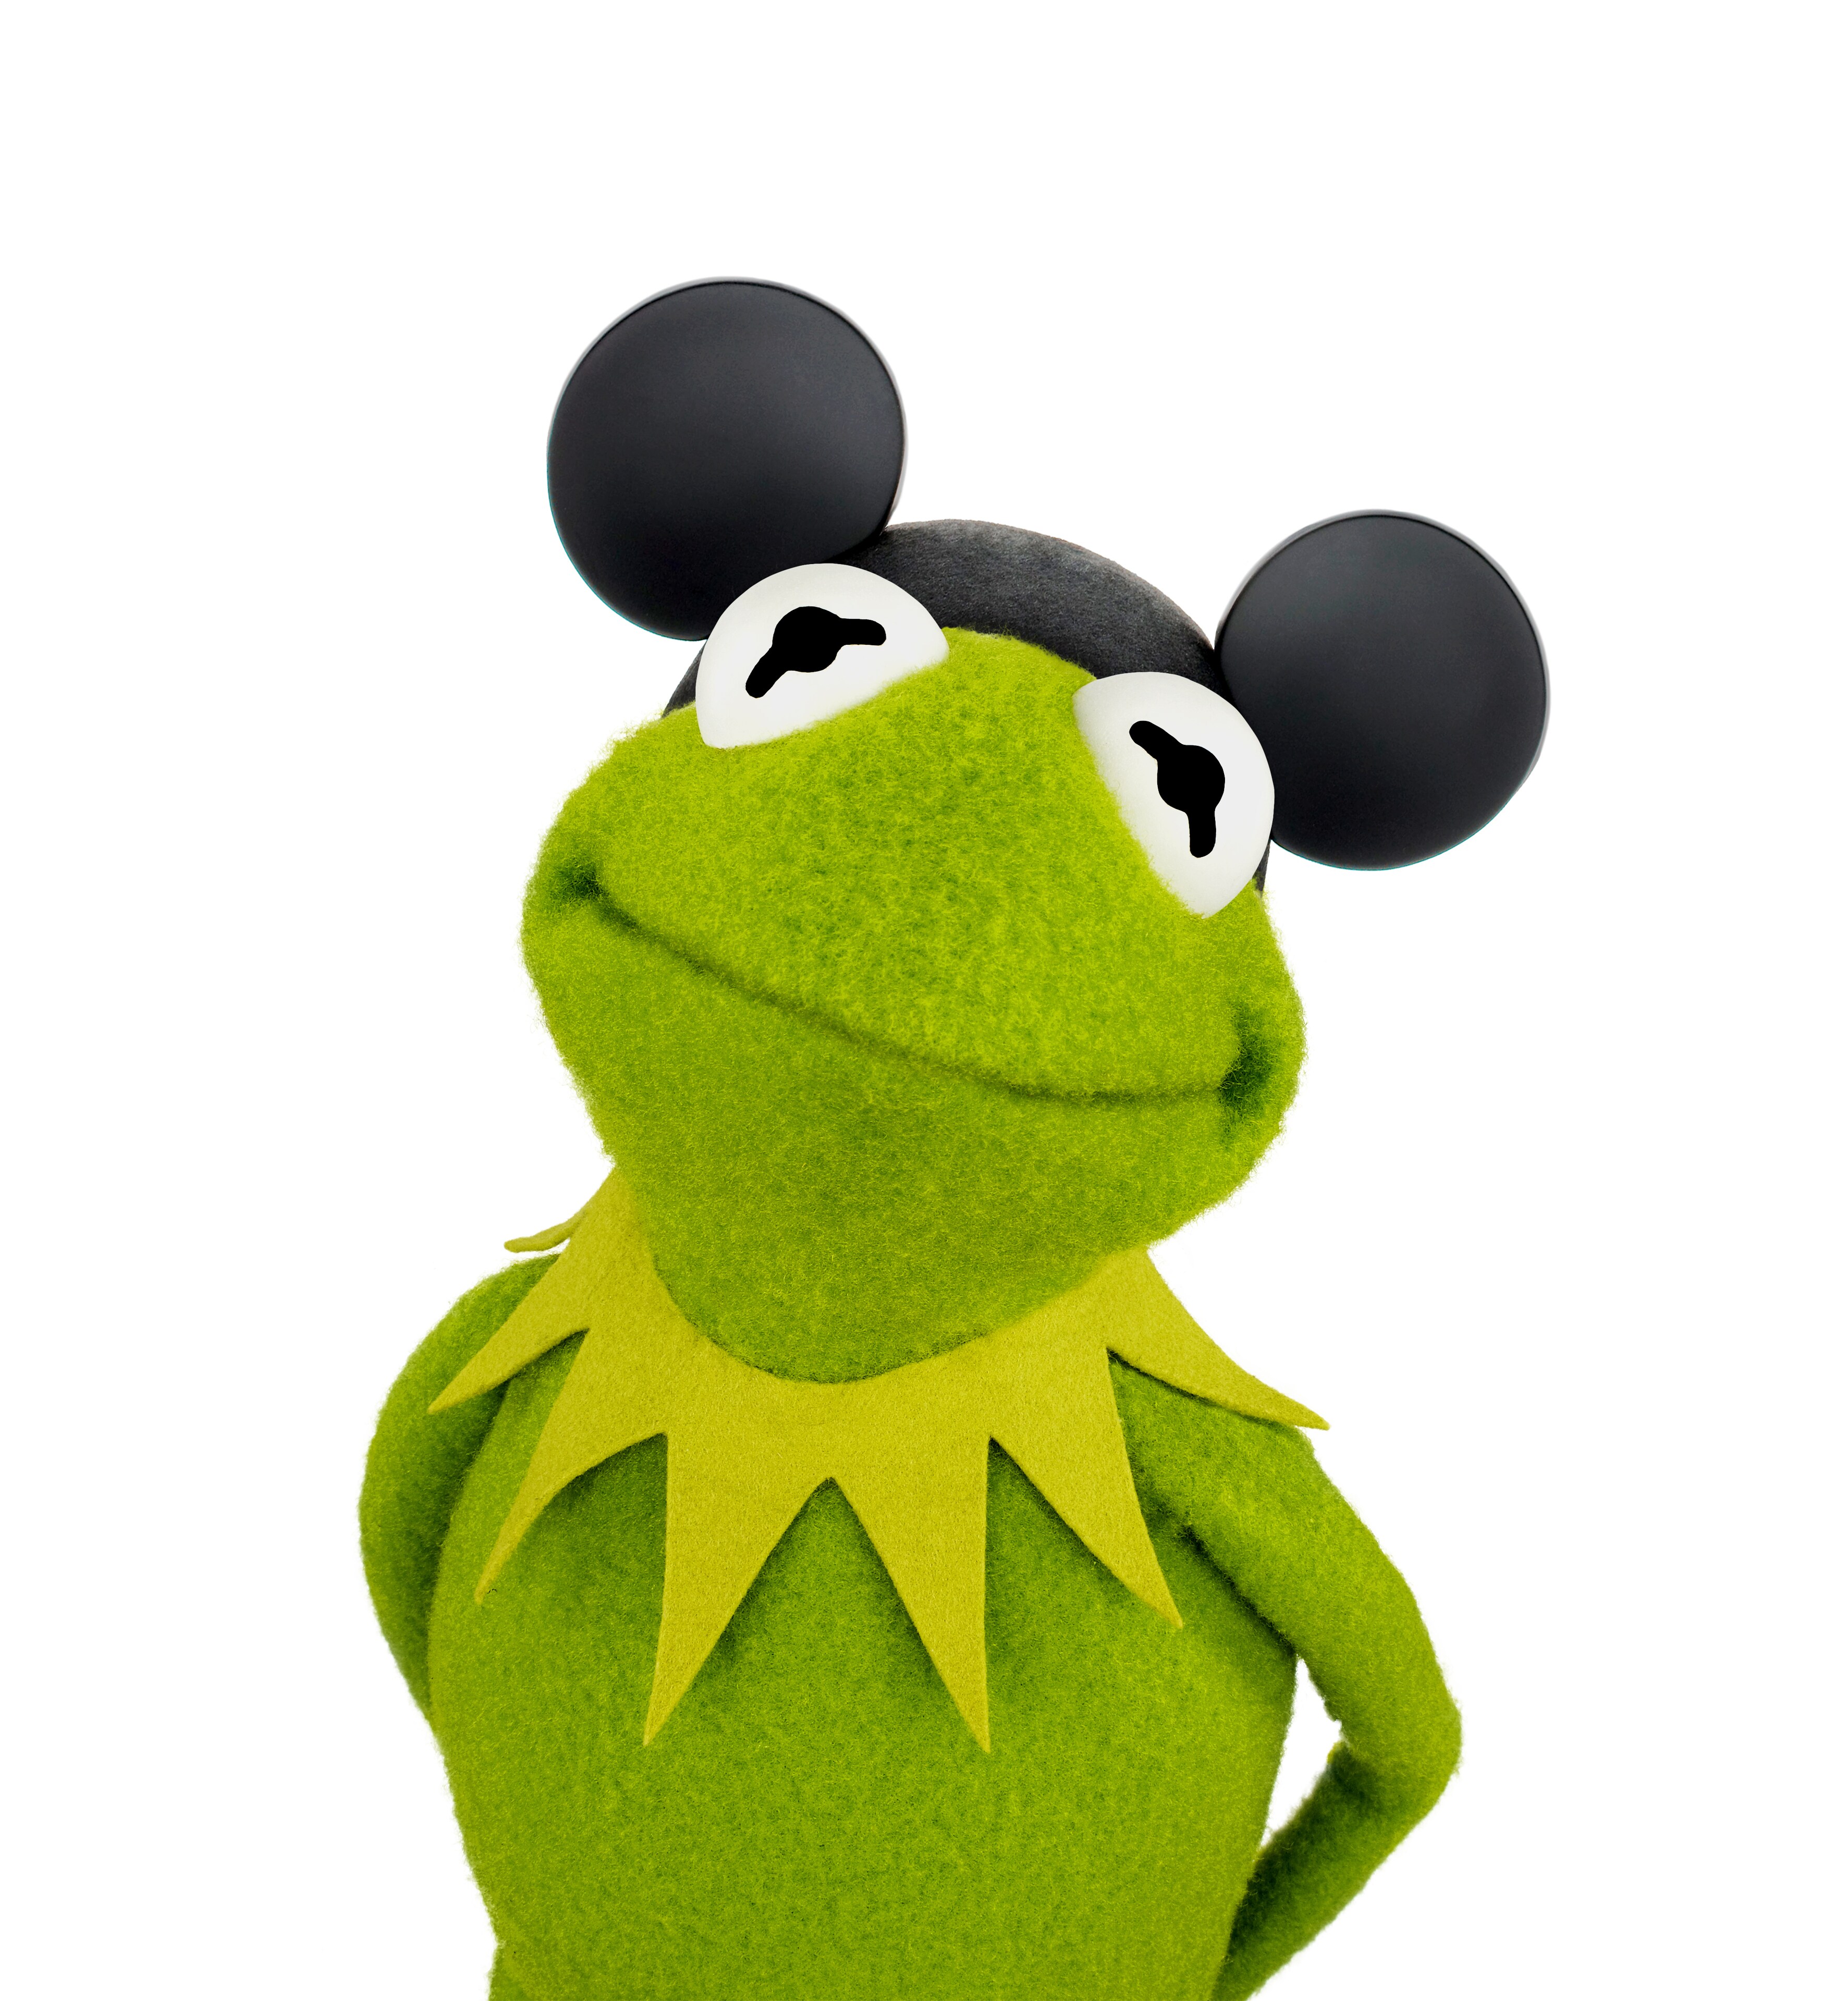 Kermit the Frog from Muppets Most Wanted, in theatres March 21, 2014